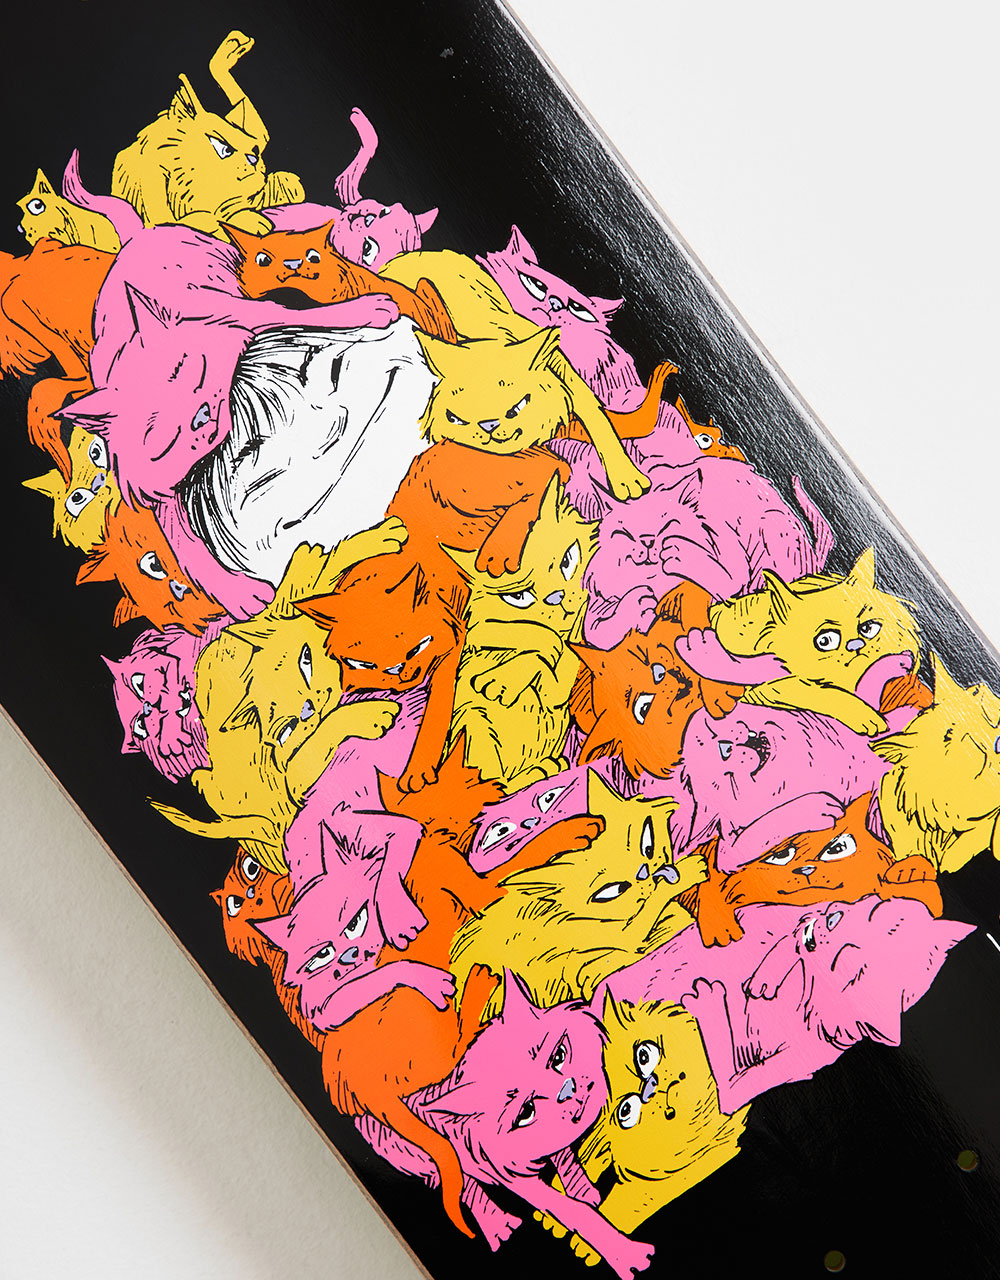 Welcome Nora Purr Pile on Popsicle Skateboard Deck - 8.25"